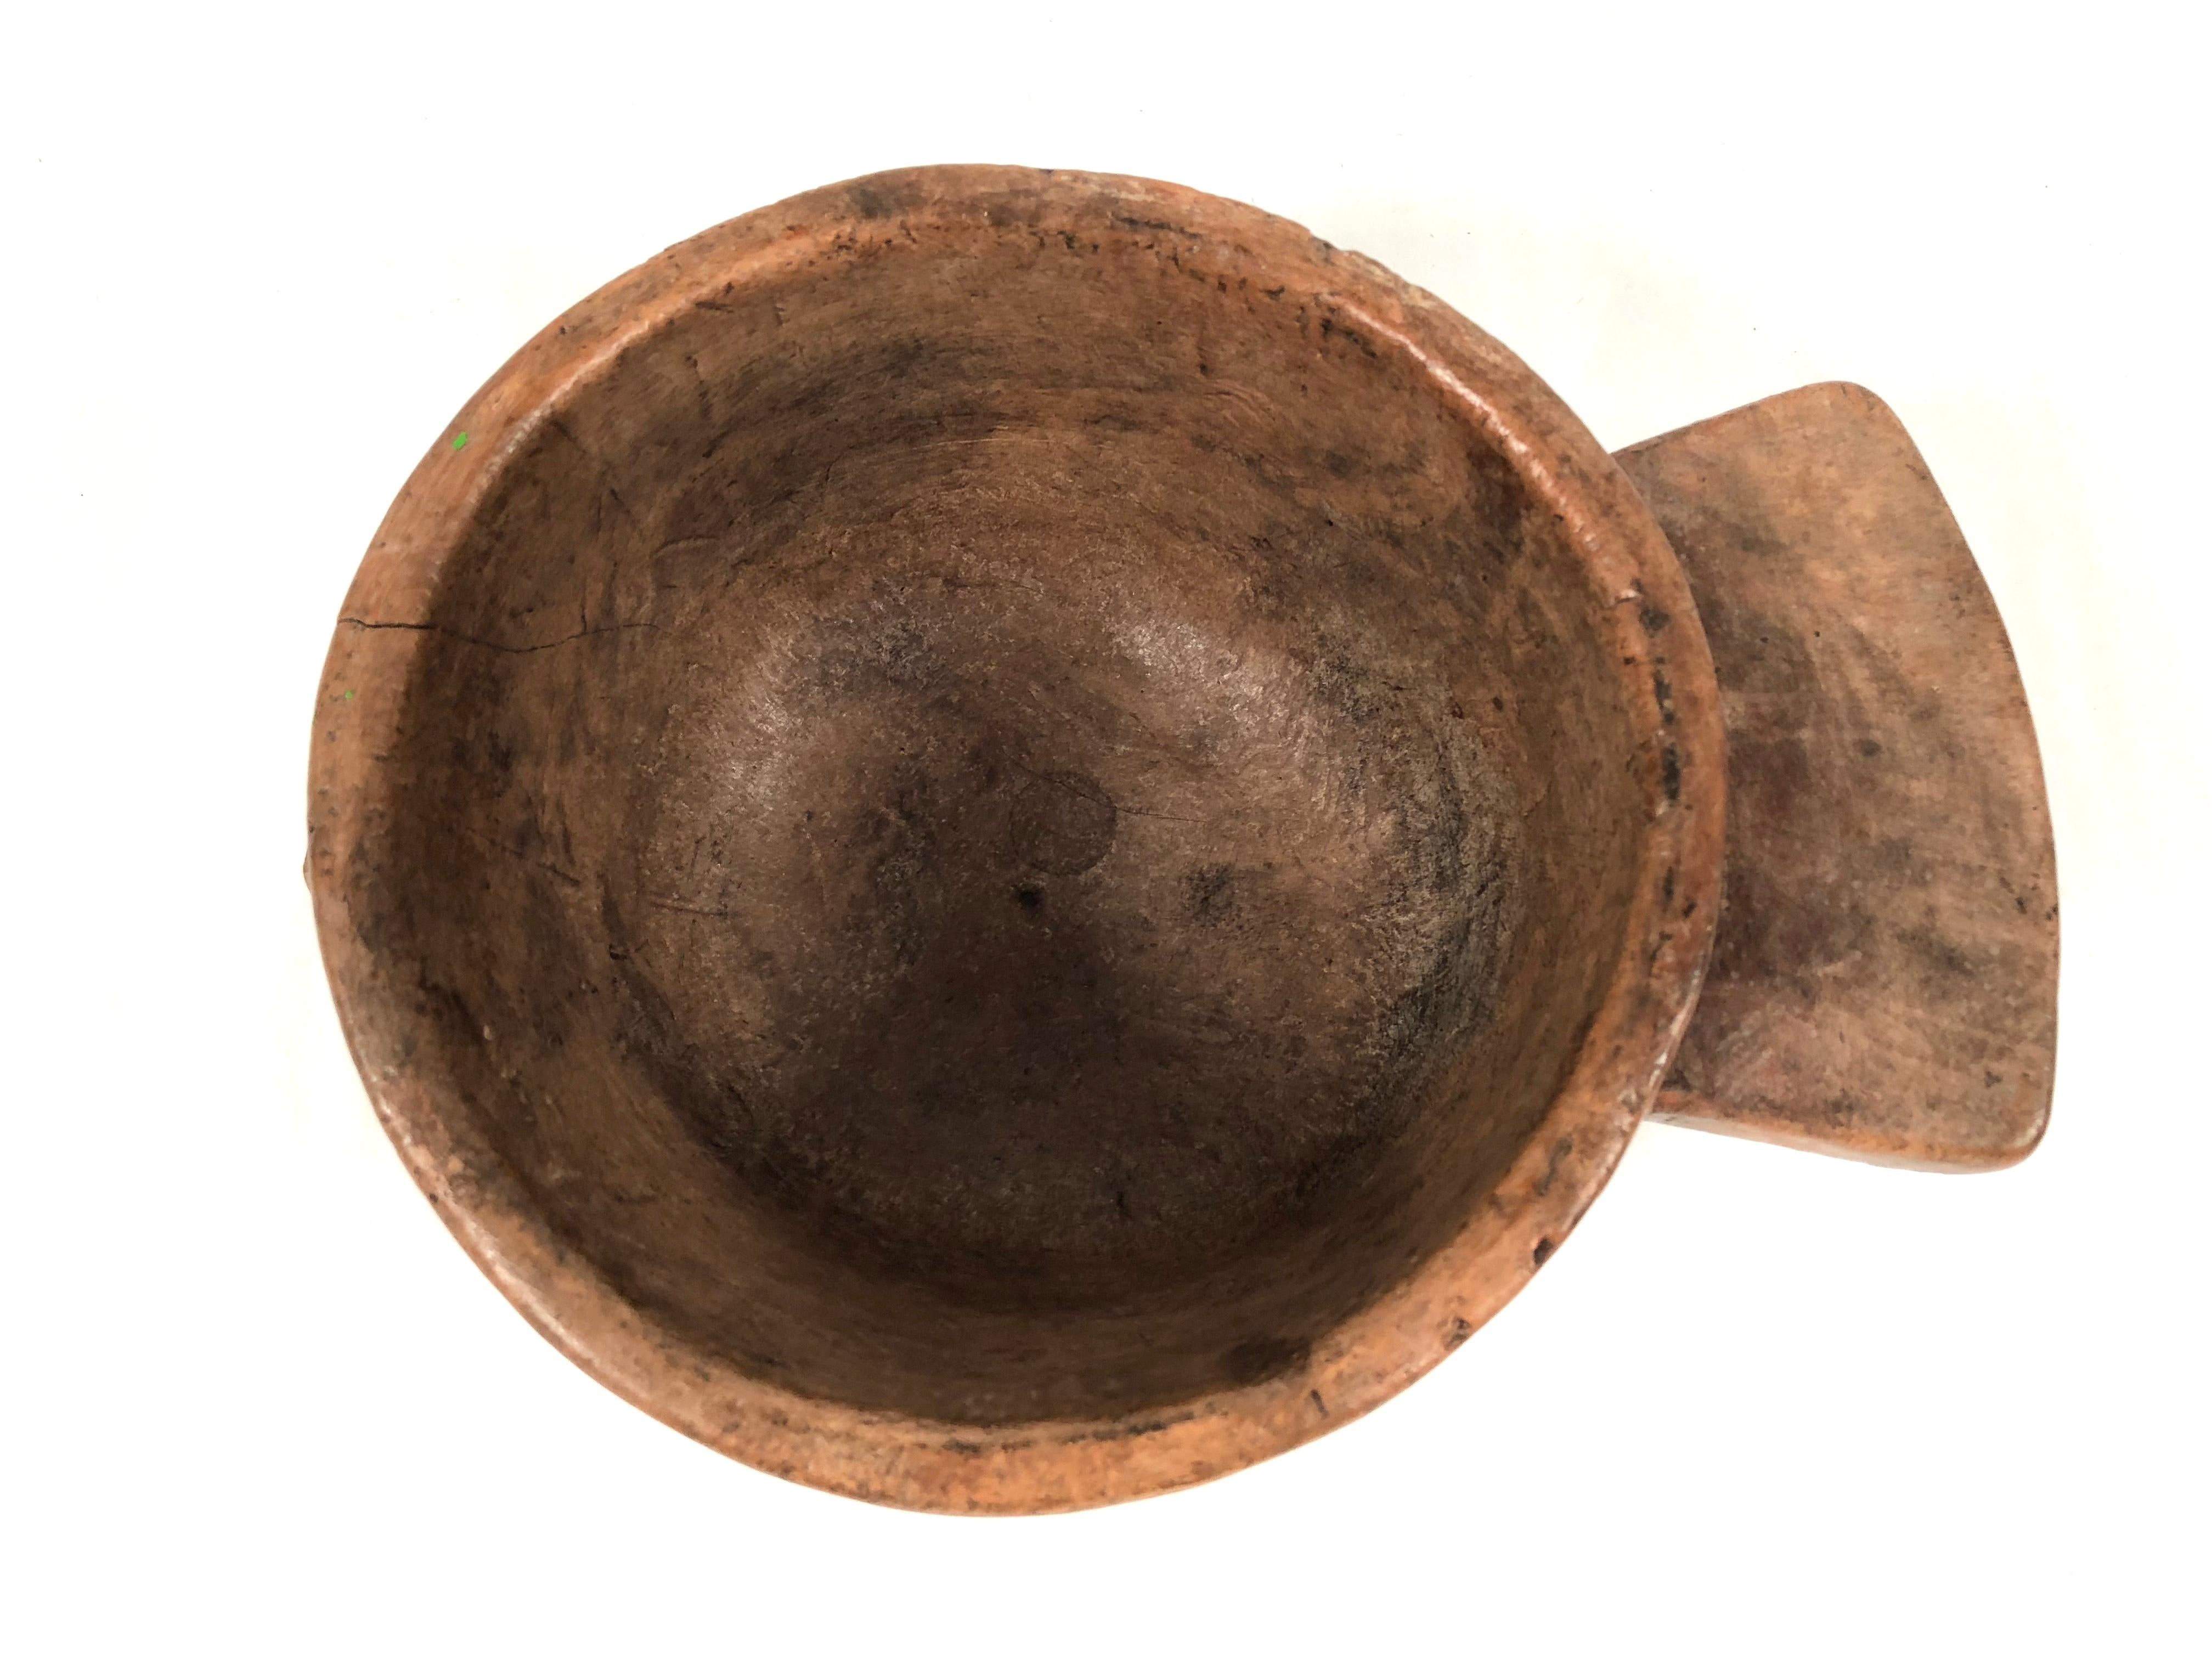 Early Primitive Carved Wood Bowl (amerikanisch)